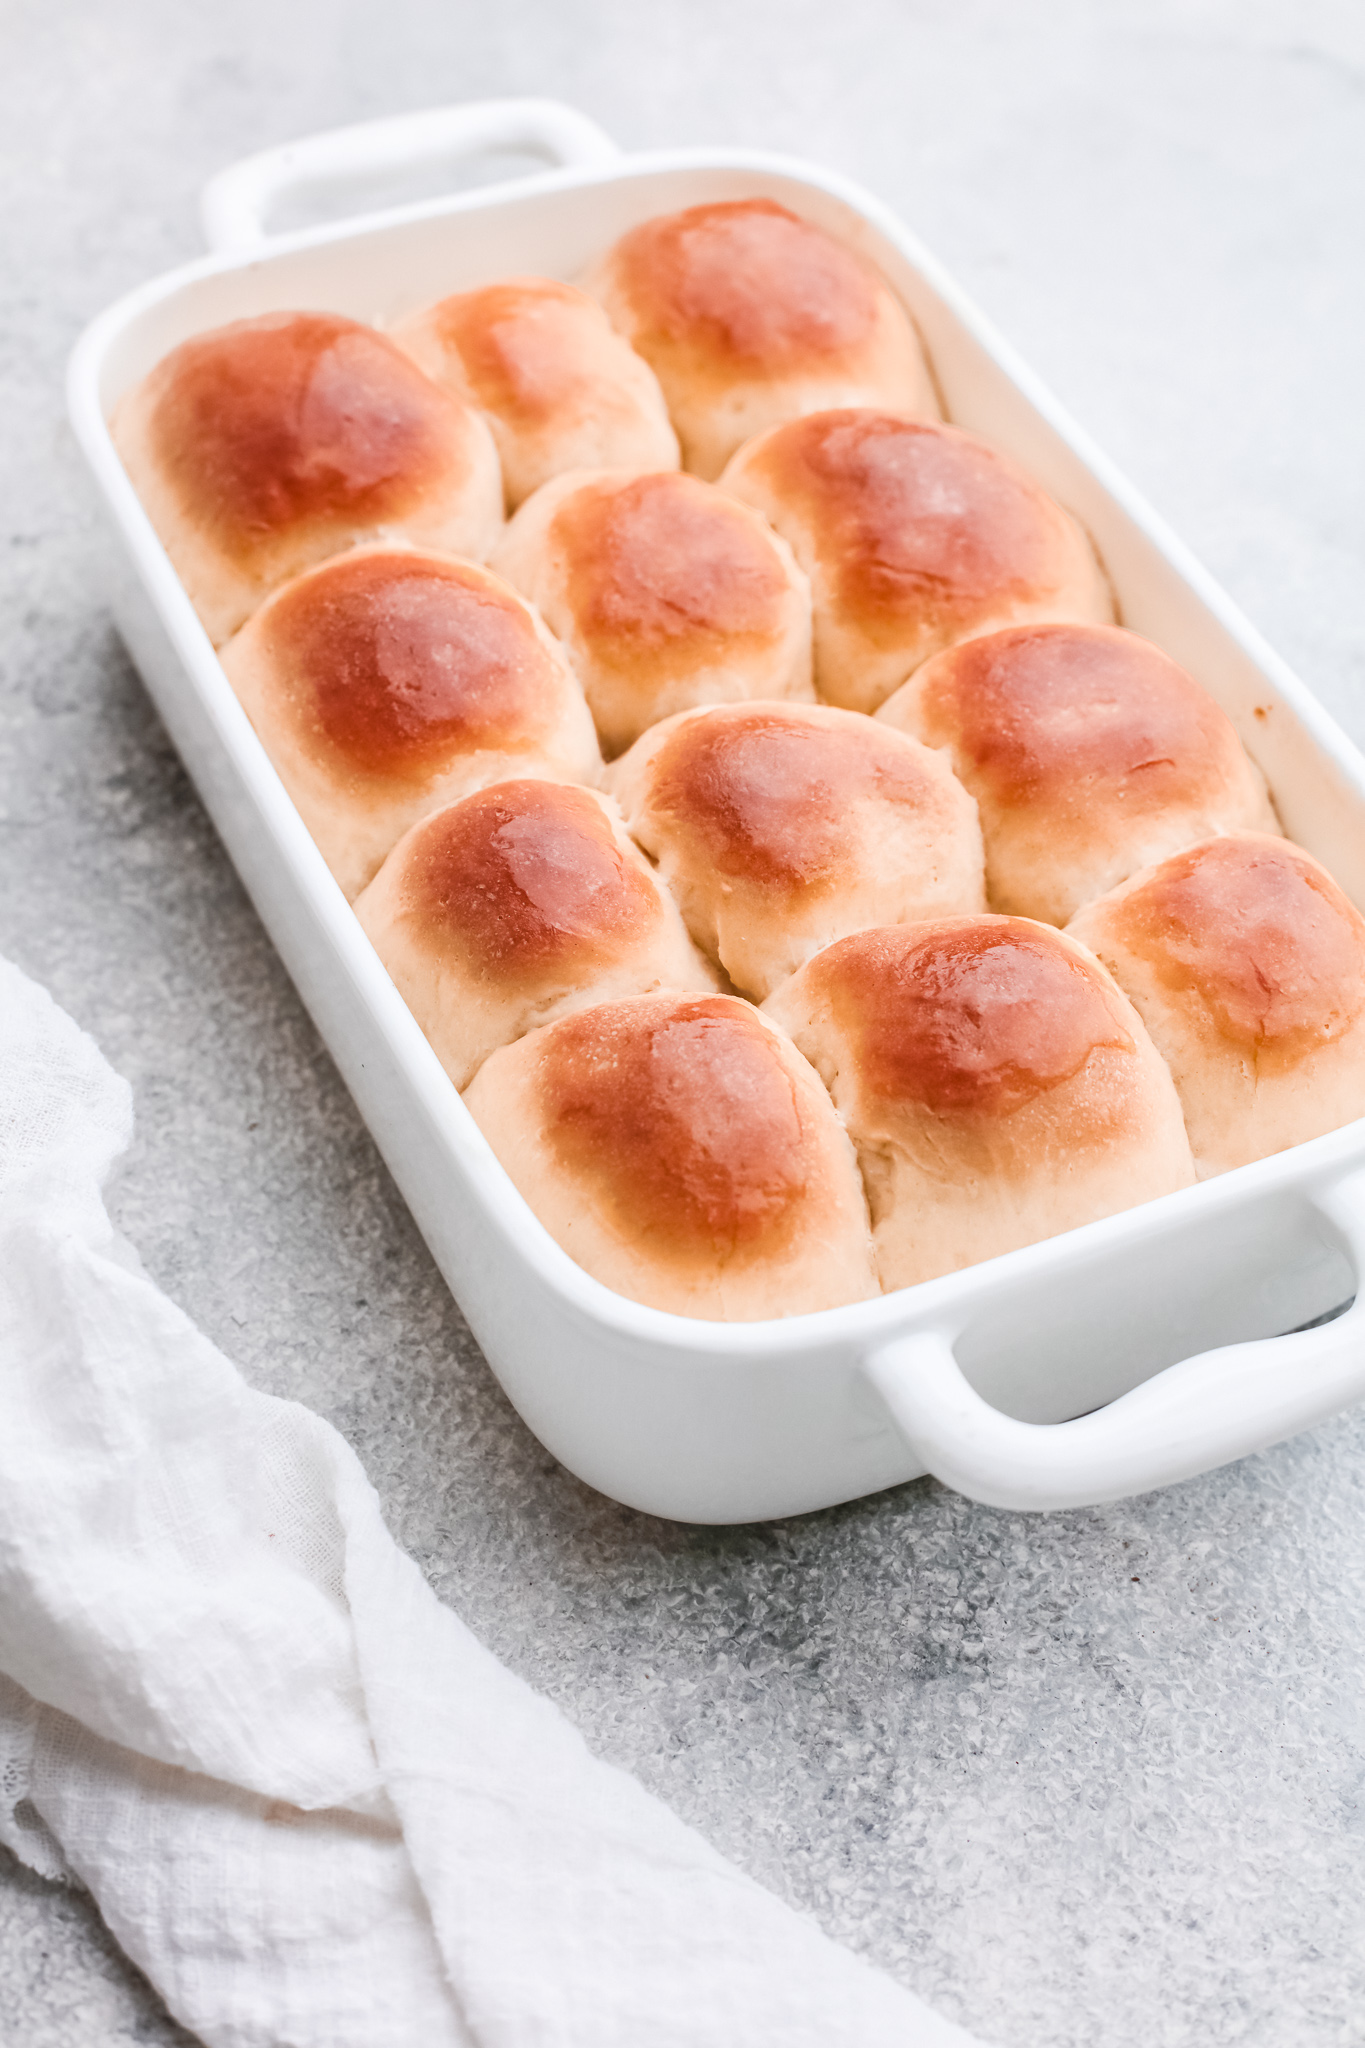 the completed easy yeast rolls recipe